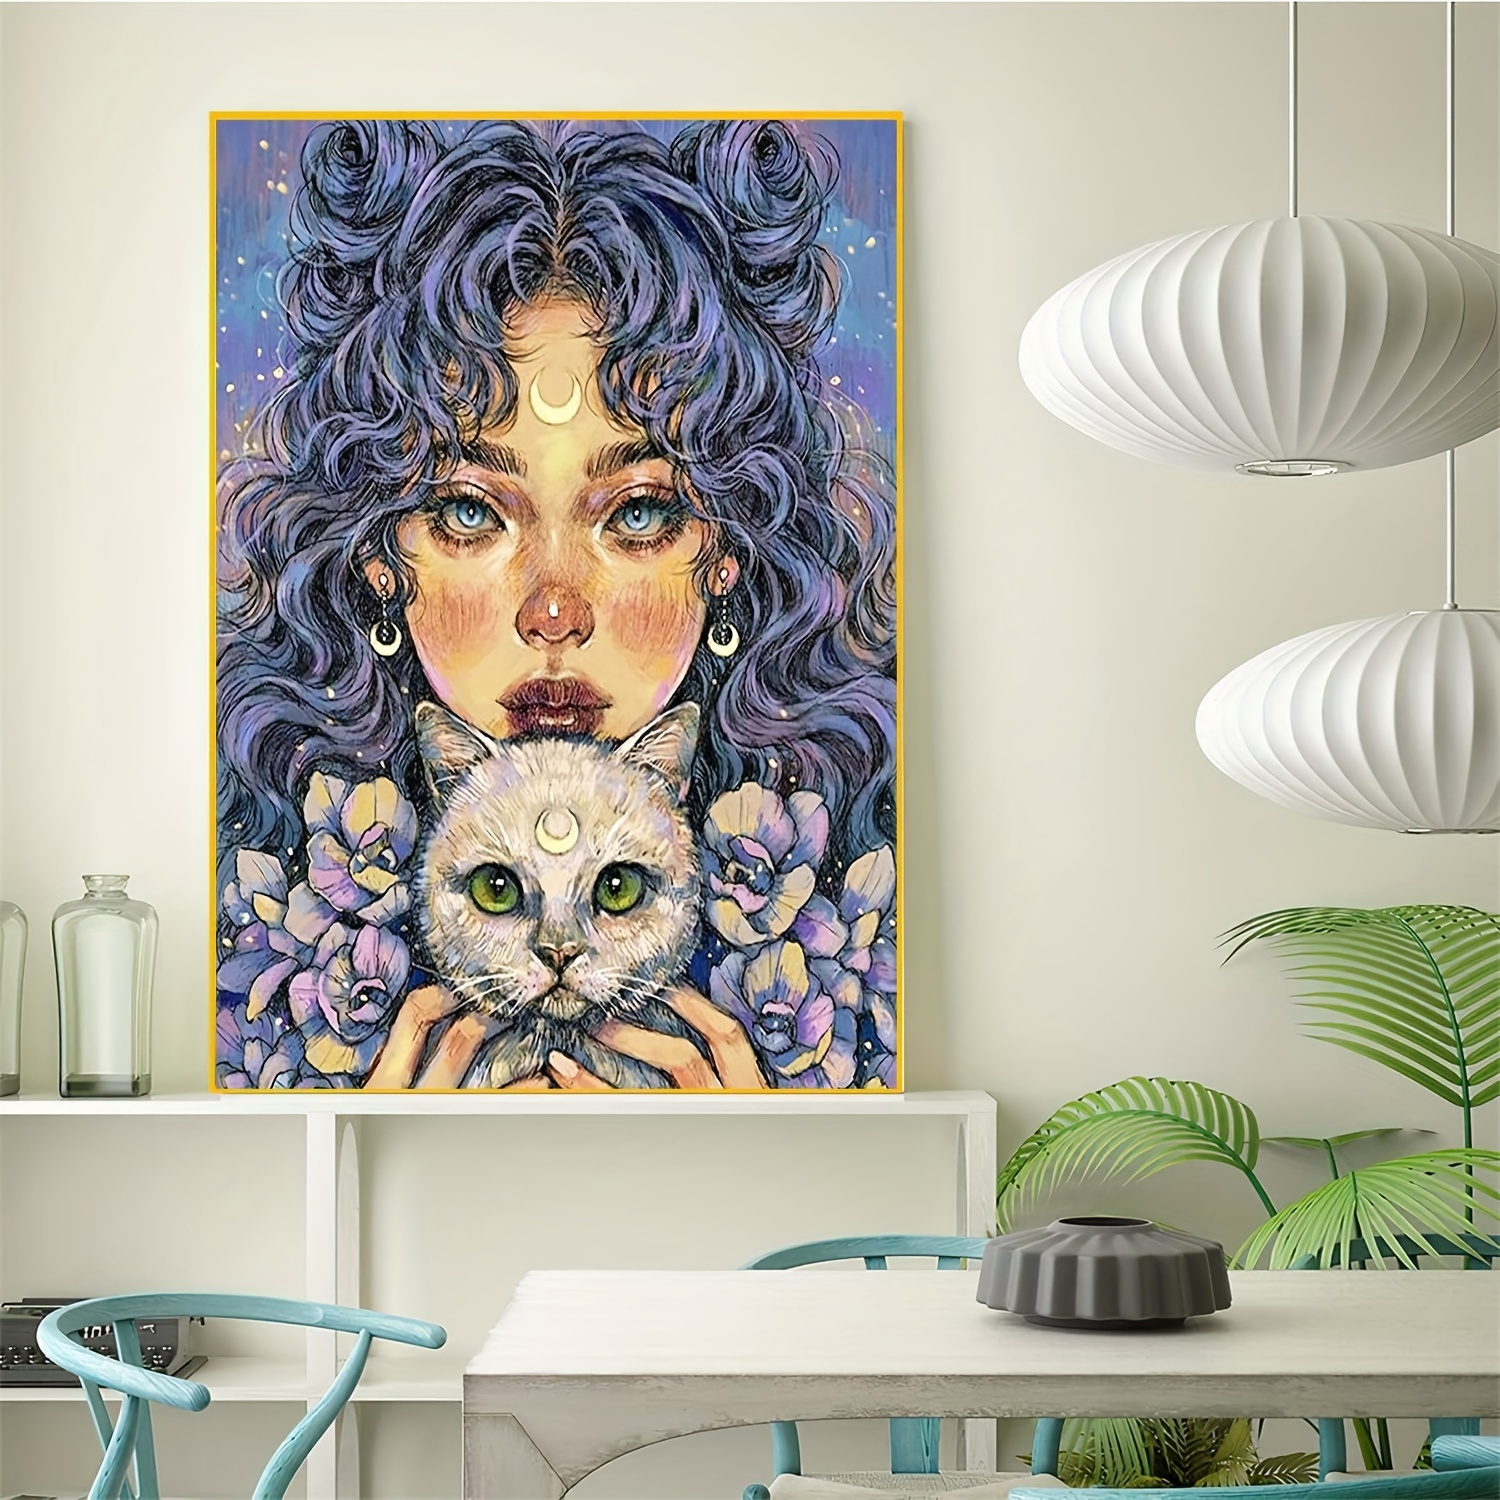 

Diy 5d Artificial Diamond Painting Kits For Adults Demon Cat Full Diamond Round Gemstone Painting Art Craft For Wall Decor (30x40cm/11.8x15.8in)